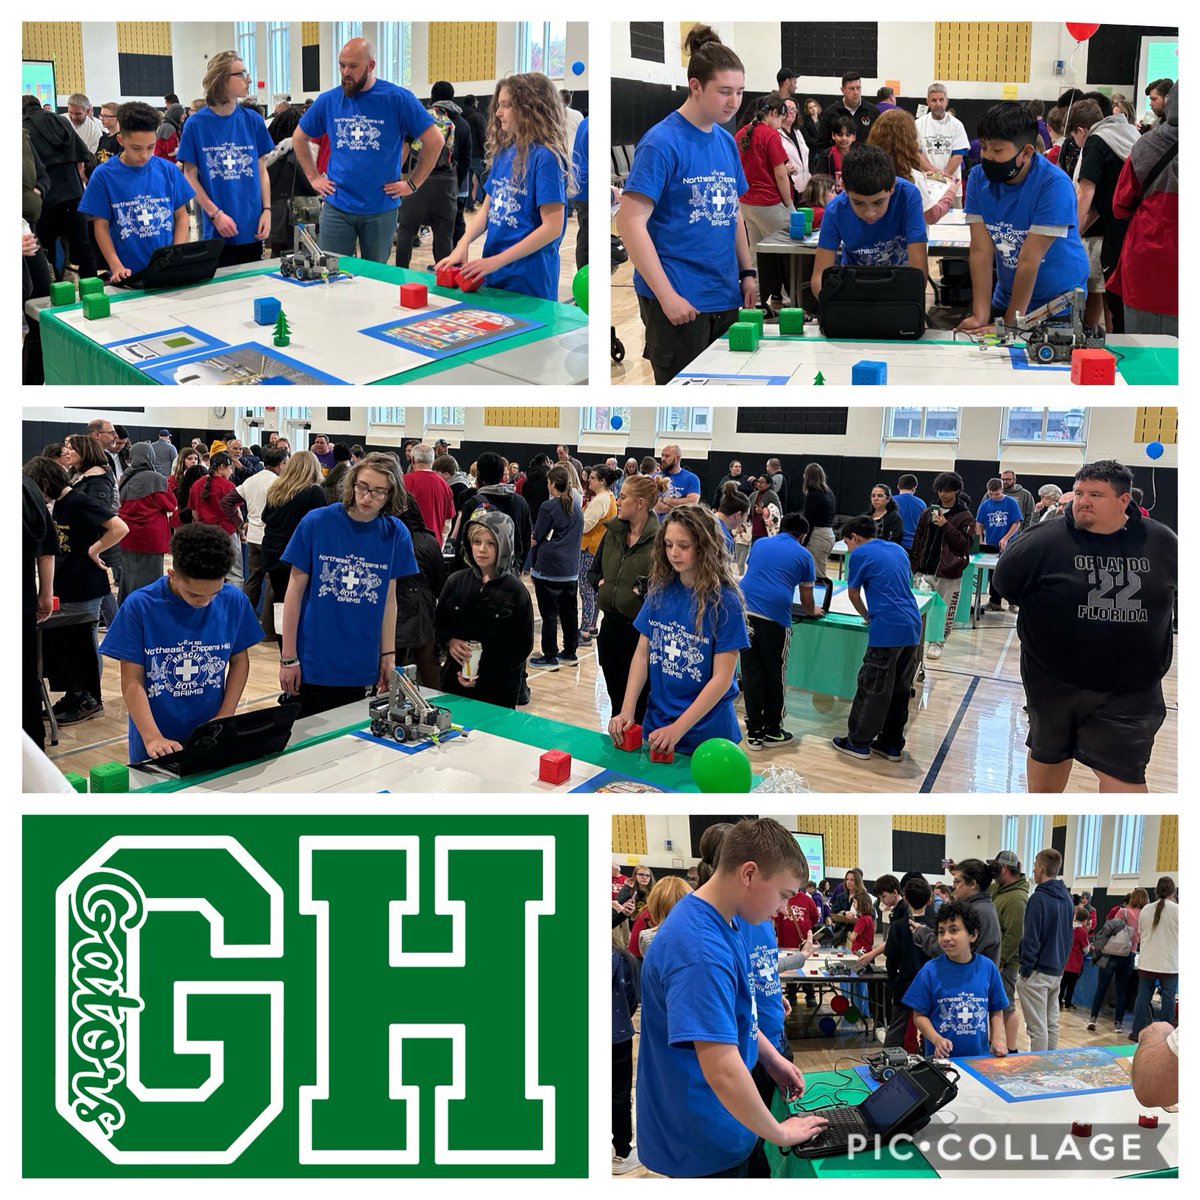 BPS Middle School Robotics Challenge… What a great job each of the teams did to prepare and compete yesterday! Special thanks to Mr. Sample for leading our team! GREAT JOB GATORS! 🐊🤖💙 @GHillsGators @BristolCTSchool